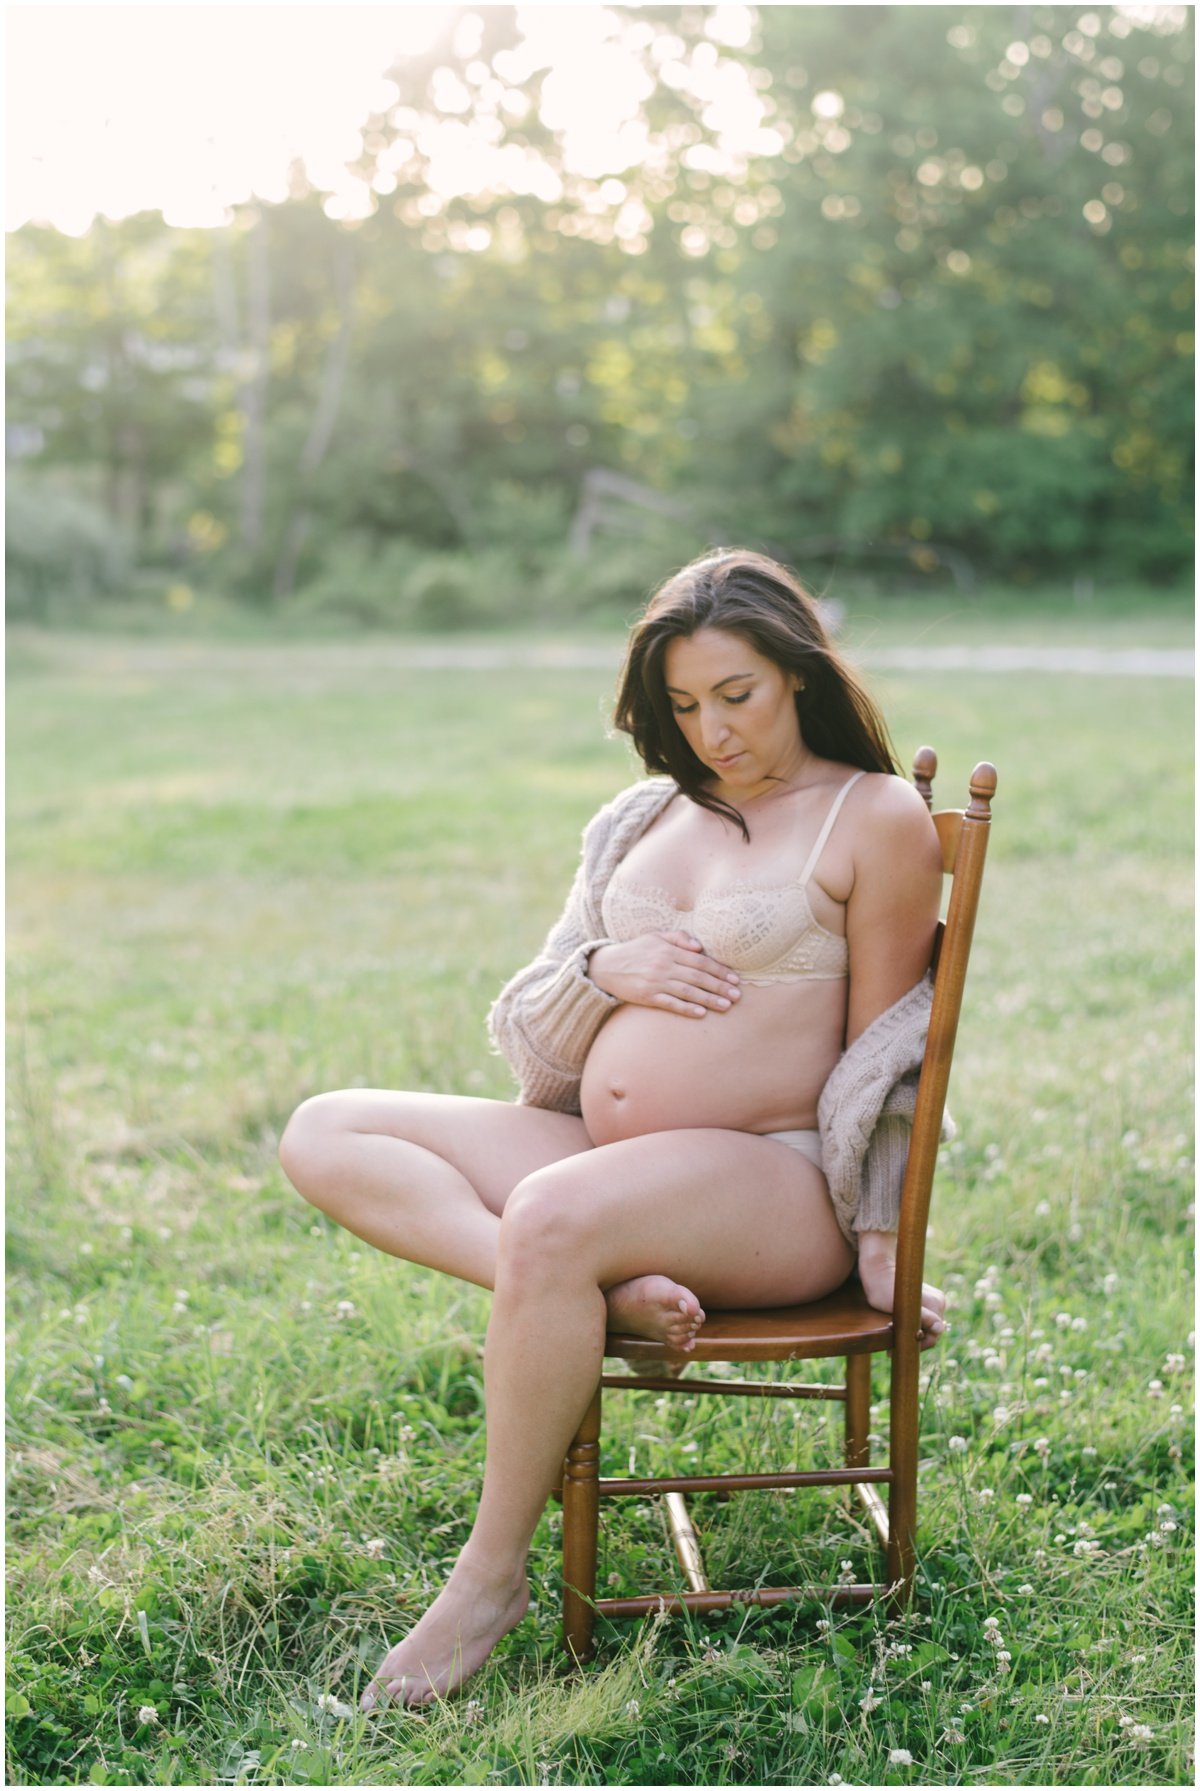 Woman sitting on chair and looking down at pregnant belly during maternity session | NKB Photo